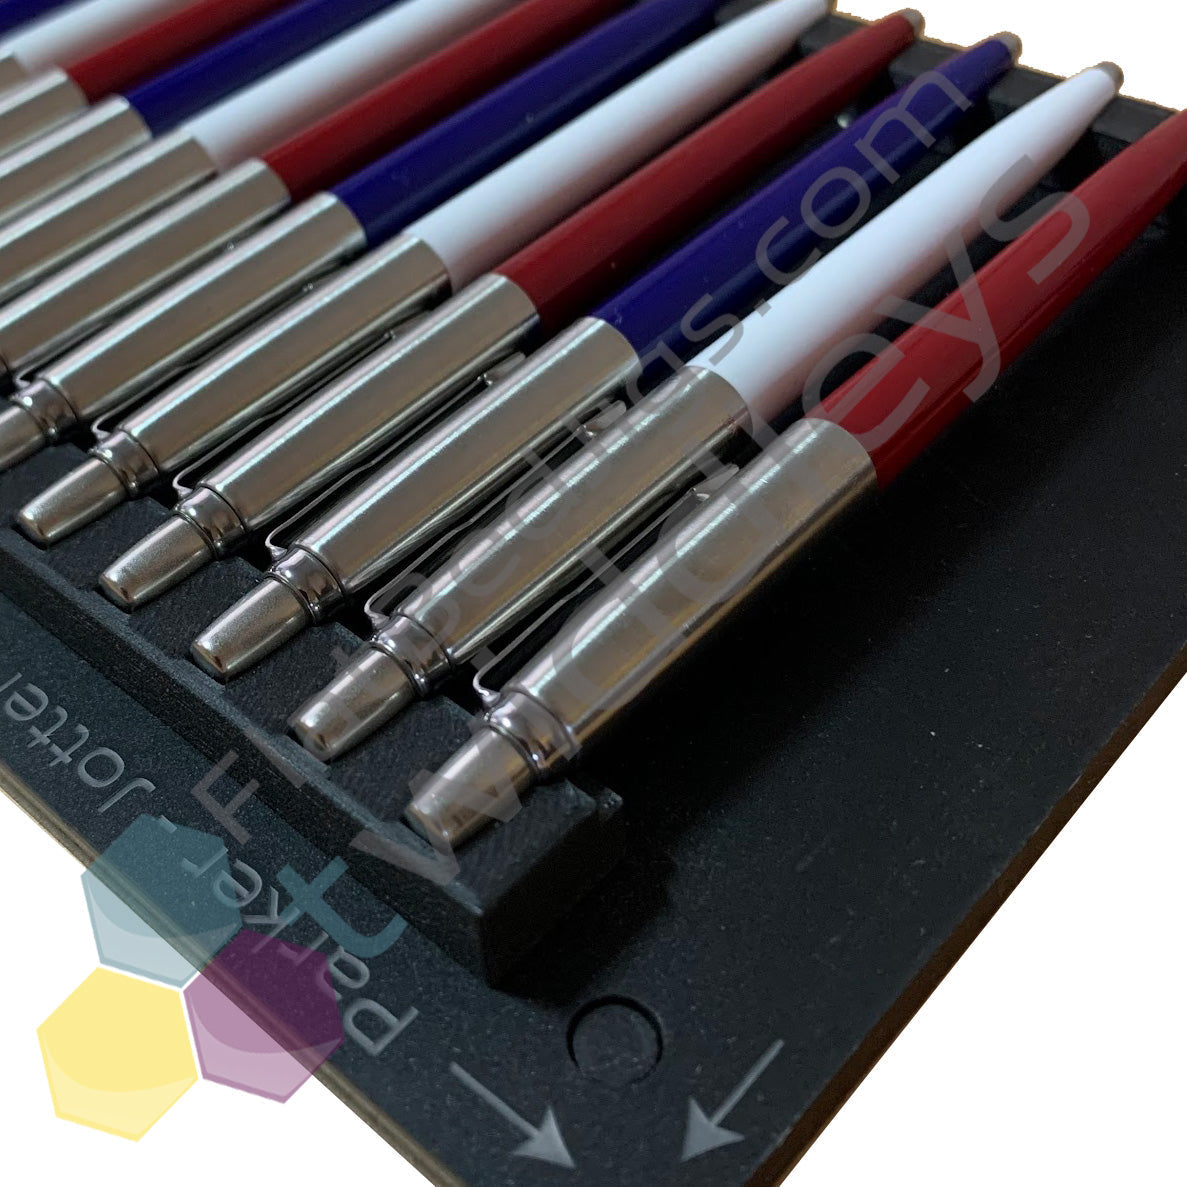 Parker Jotter Pen Printing Jig for Roland MO-240 Series Flatbed Printer (TBA Spaces)